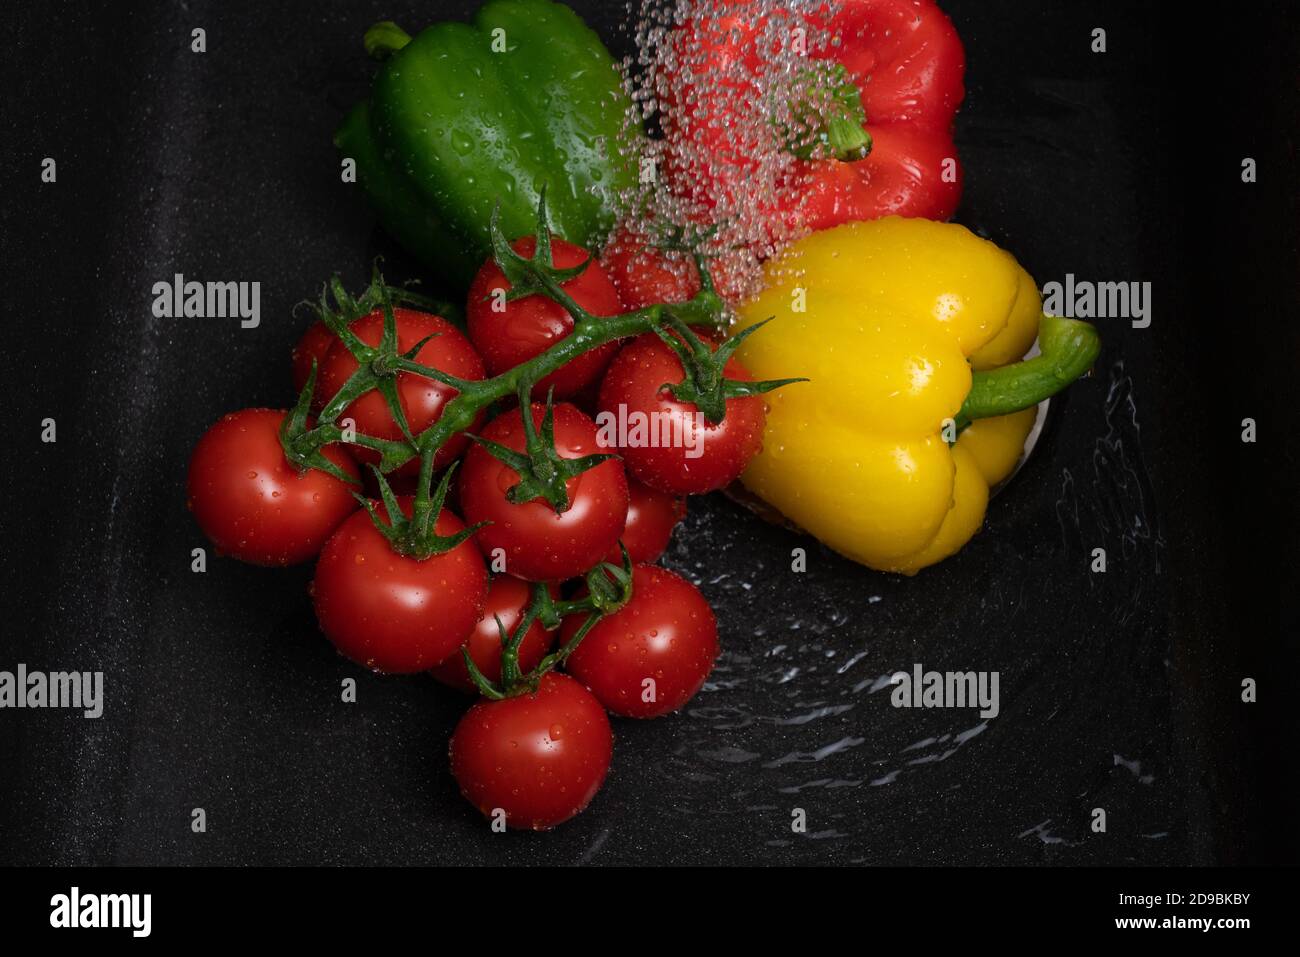 Fresh bell peppers and tomatoes on vine getting washed under tap water in black sink as healthy eating preparing vegetables concept Stock Photo